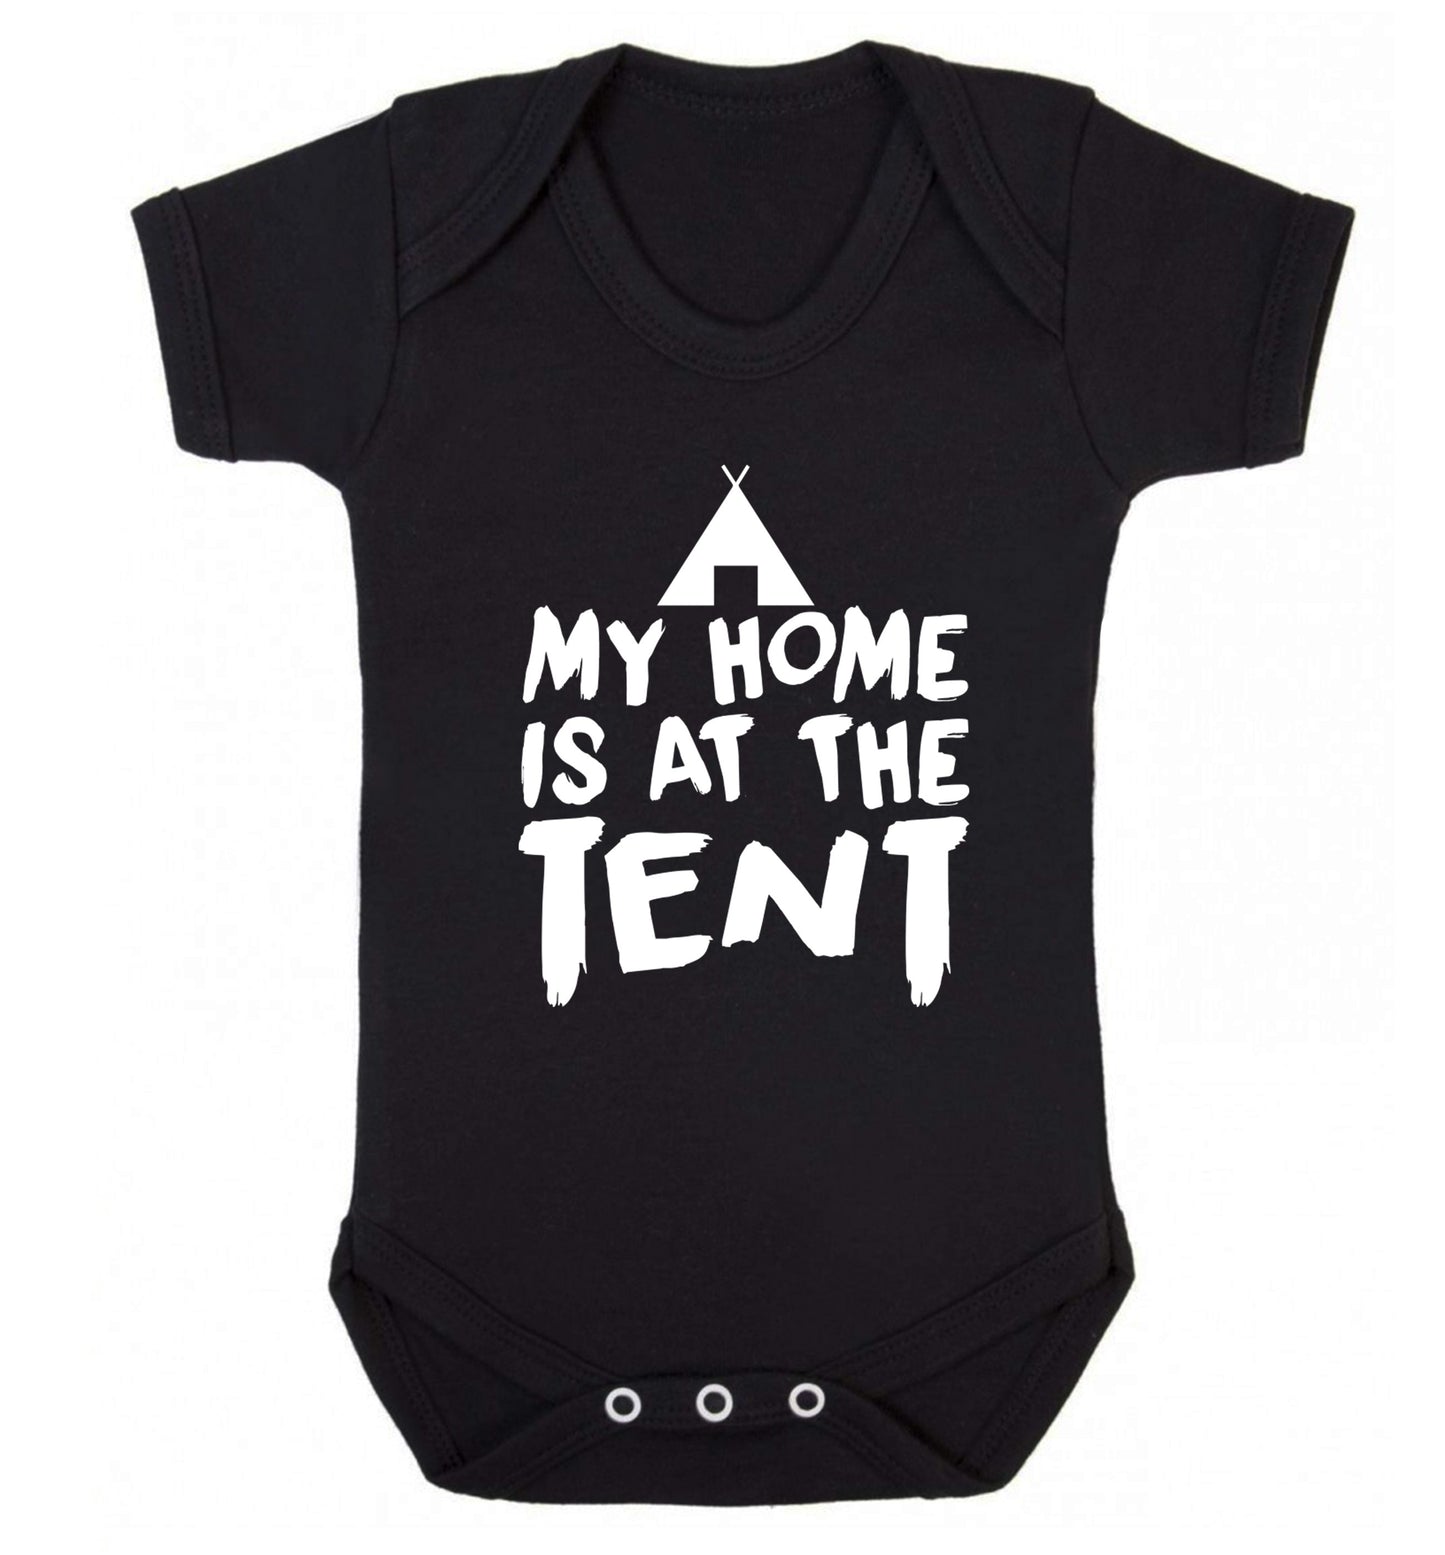 My home is at the tent Baby Vest black 18-24 months